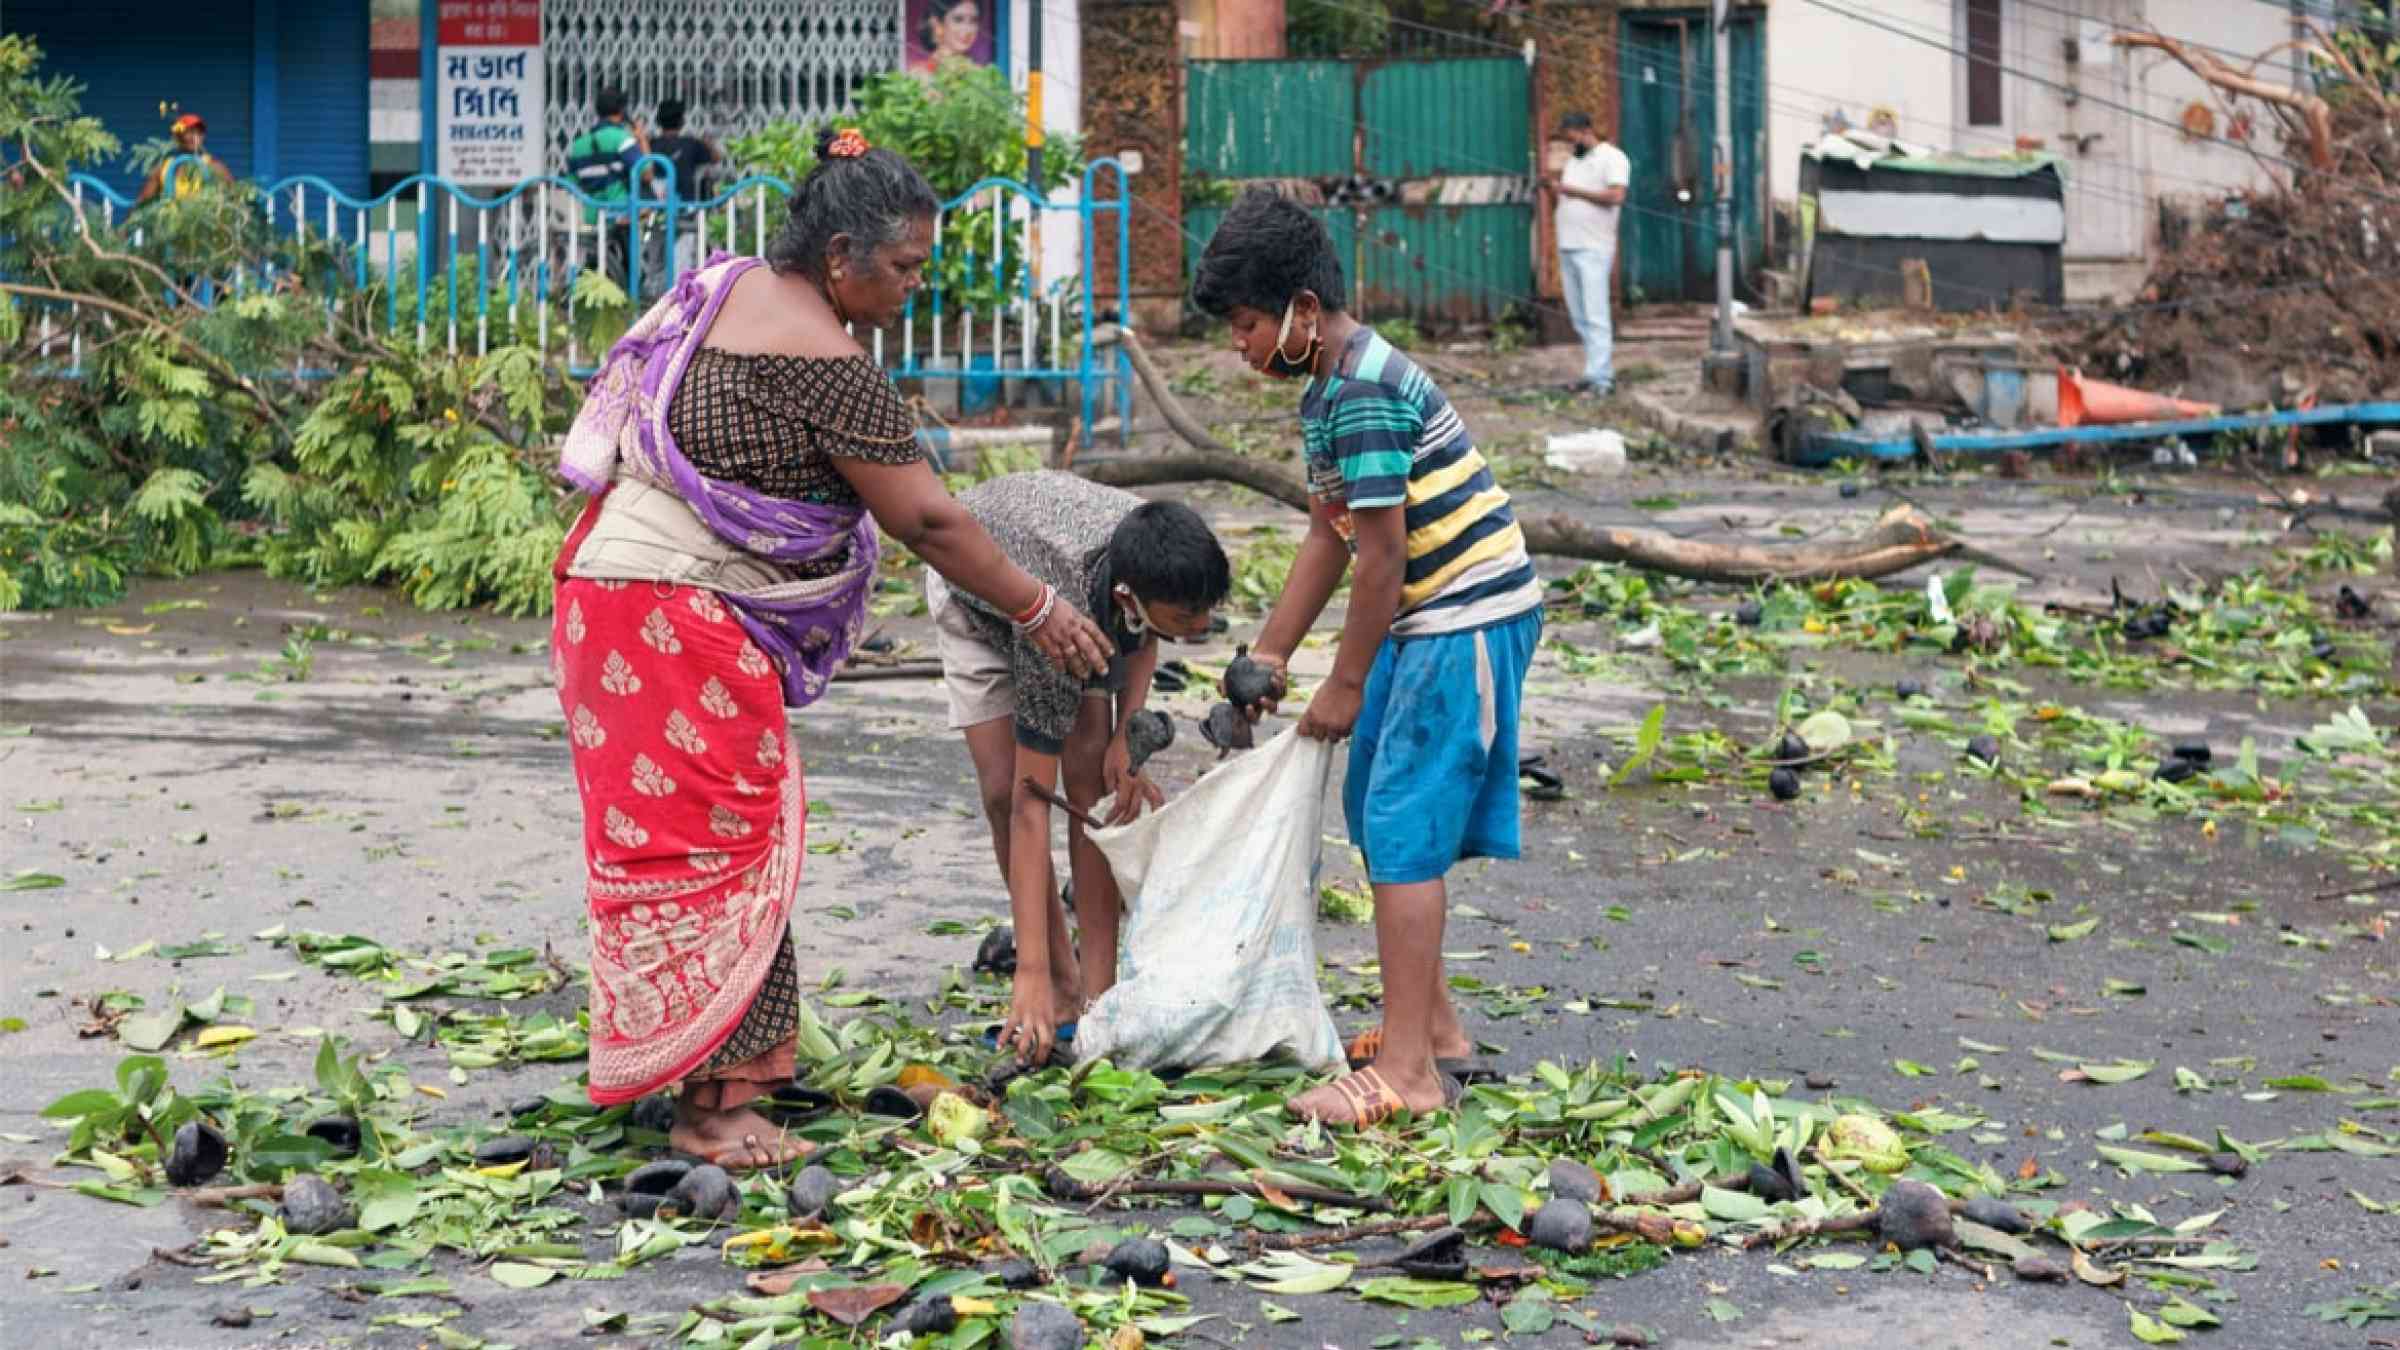 A family of street children & their mother collecting chestnuts scattered throughout the street, because the tree has fallen due to impact of cyclone Amphan, India (2020)